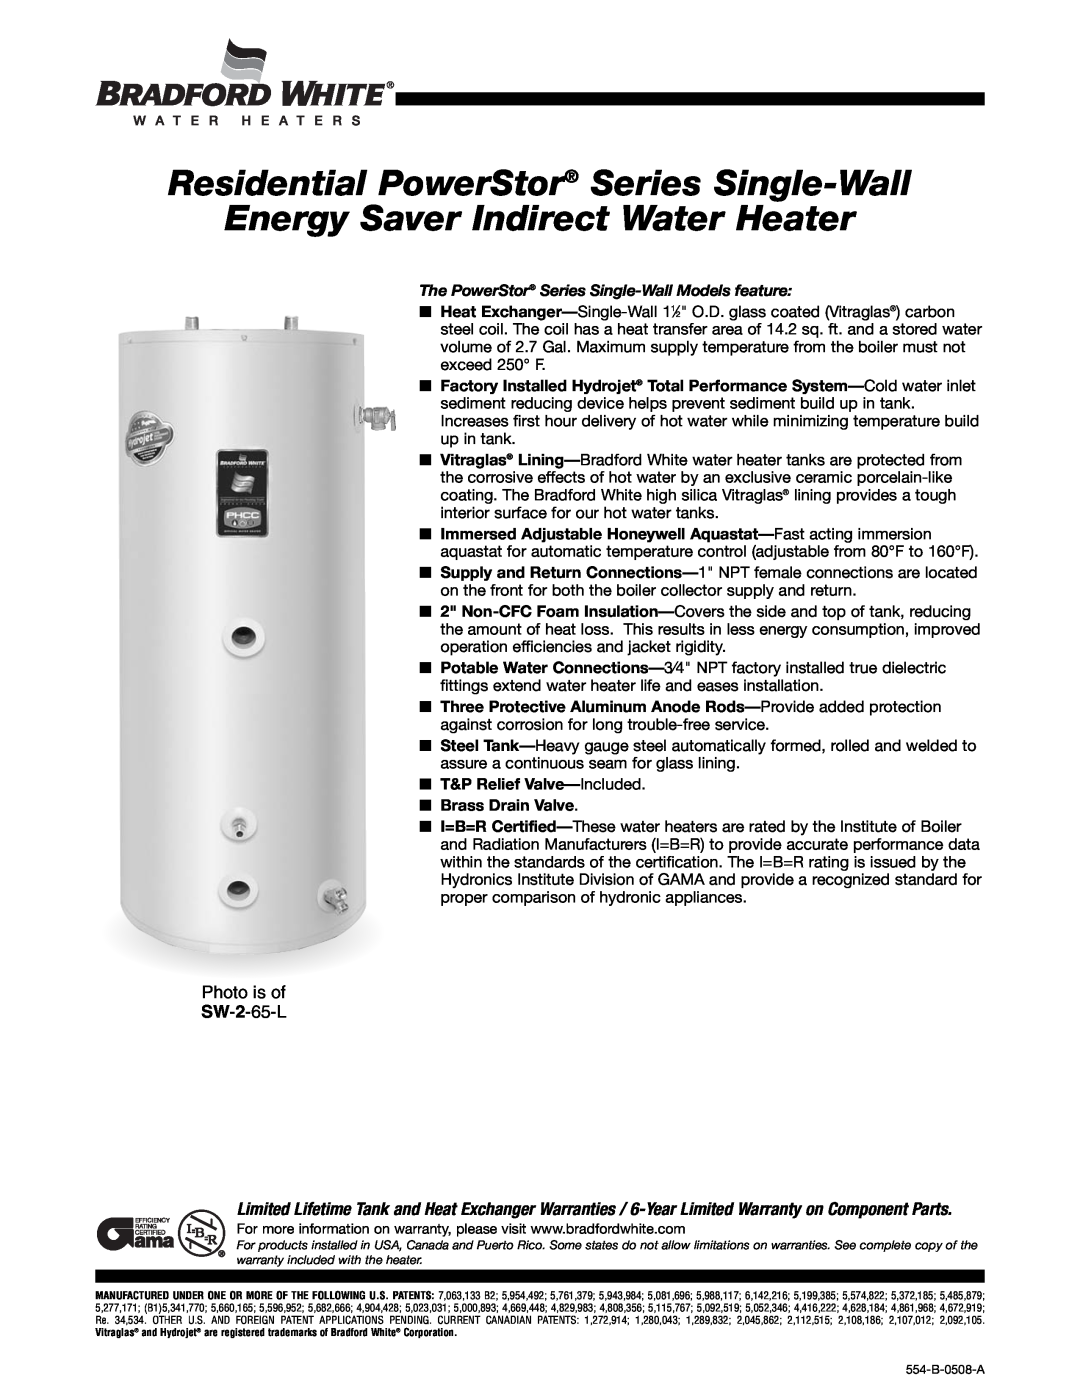 Bradford-White Corp SW-2-65-L warranty Residential PowerStor Series Single-Wall, Energy Saver Indirect Water Heater 